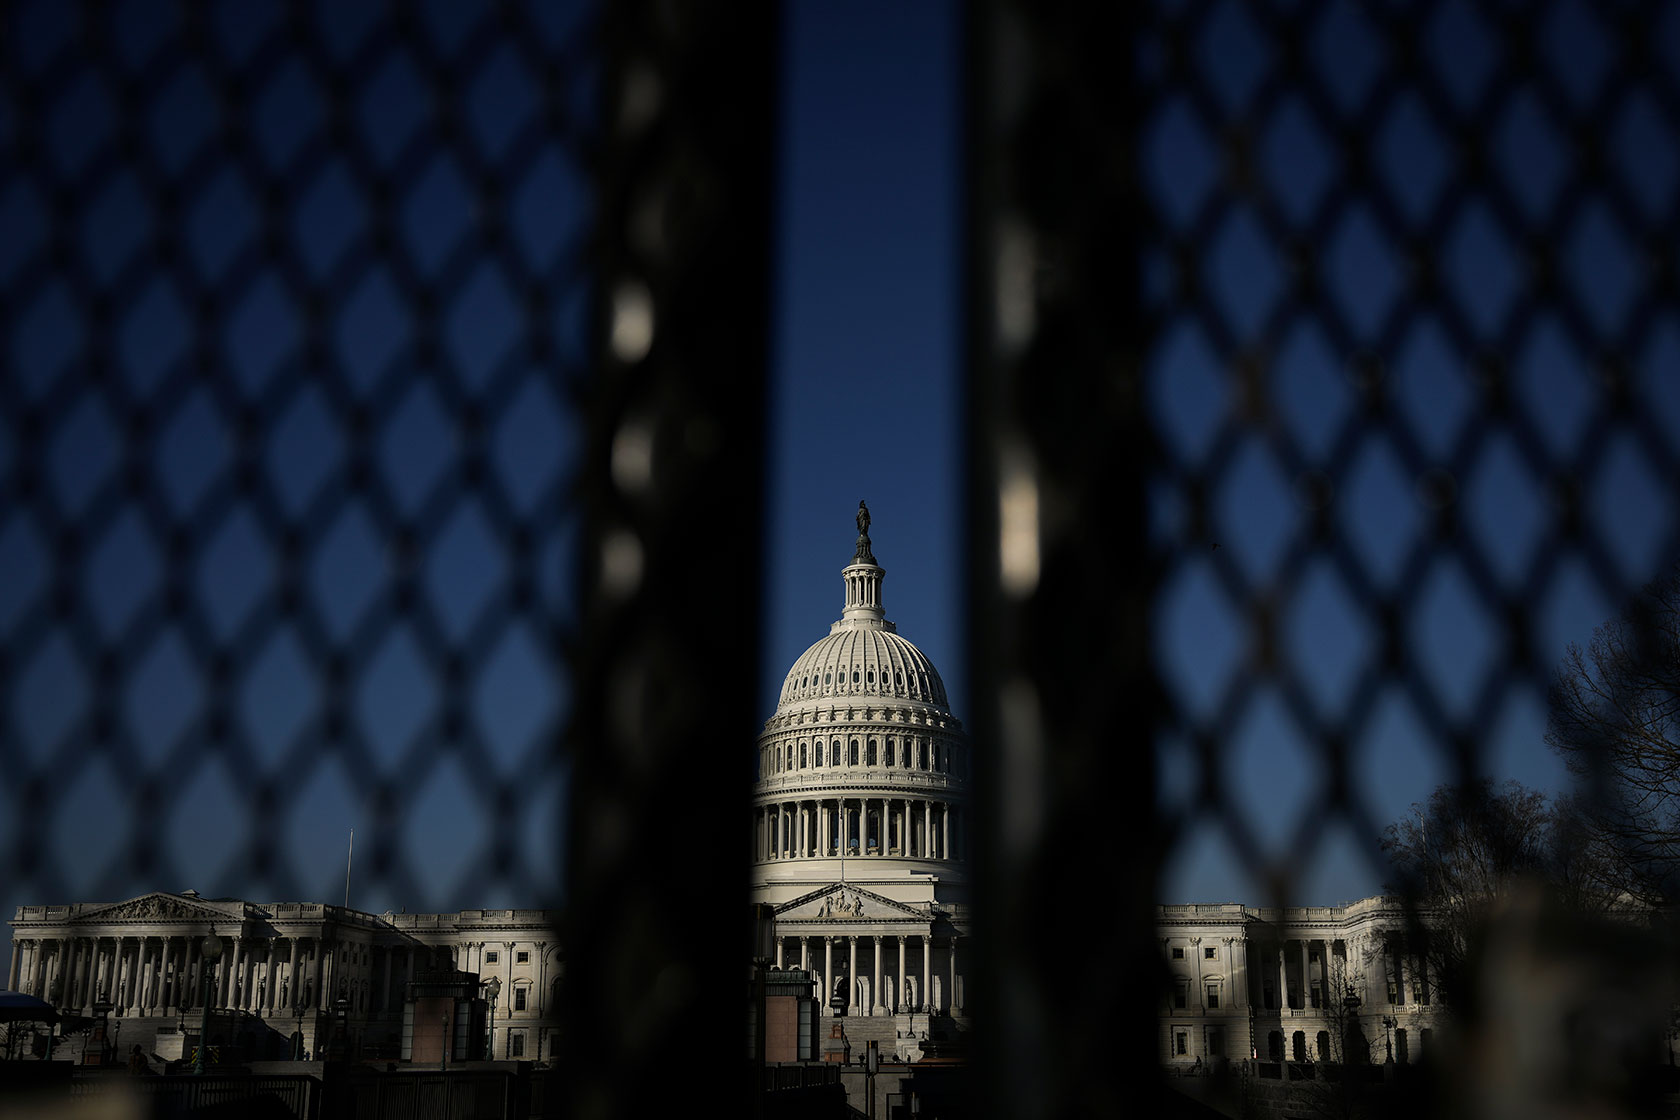 Photo shows the Capitol building dome behind black fencing against a blue sky